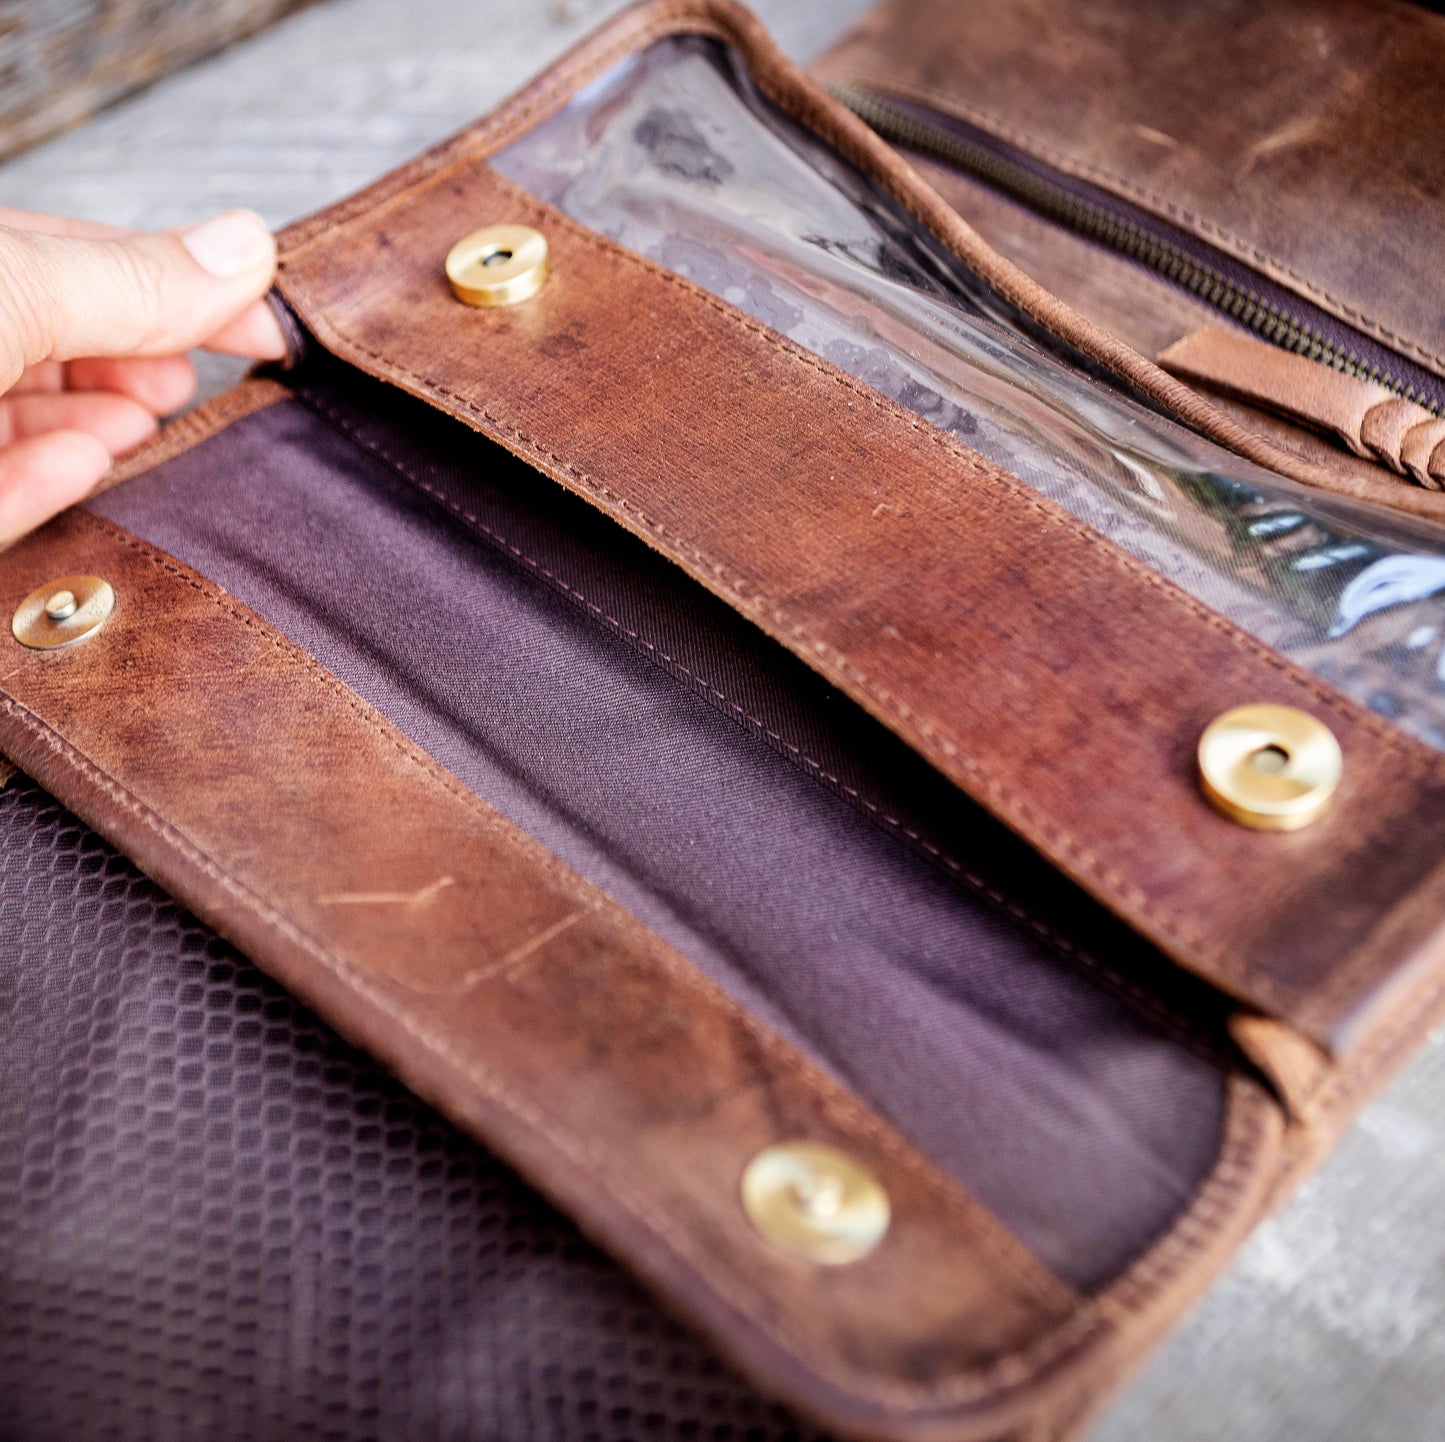 Buffalo Hide Leather Hanging Toiletry Roll